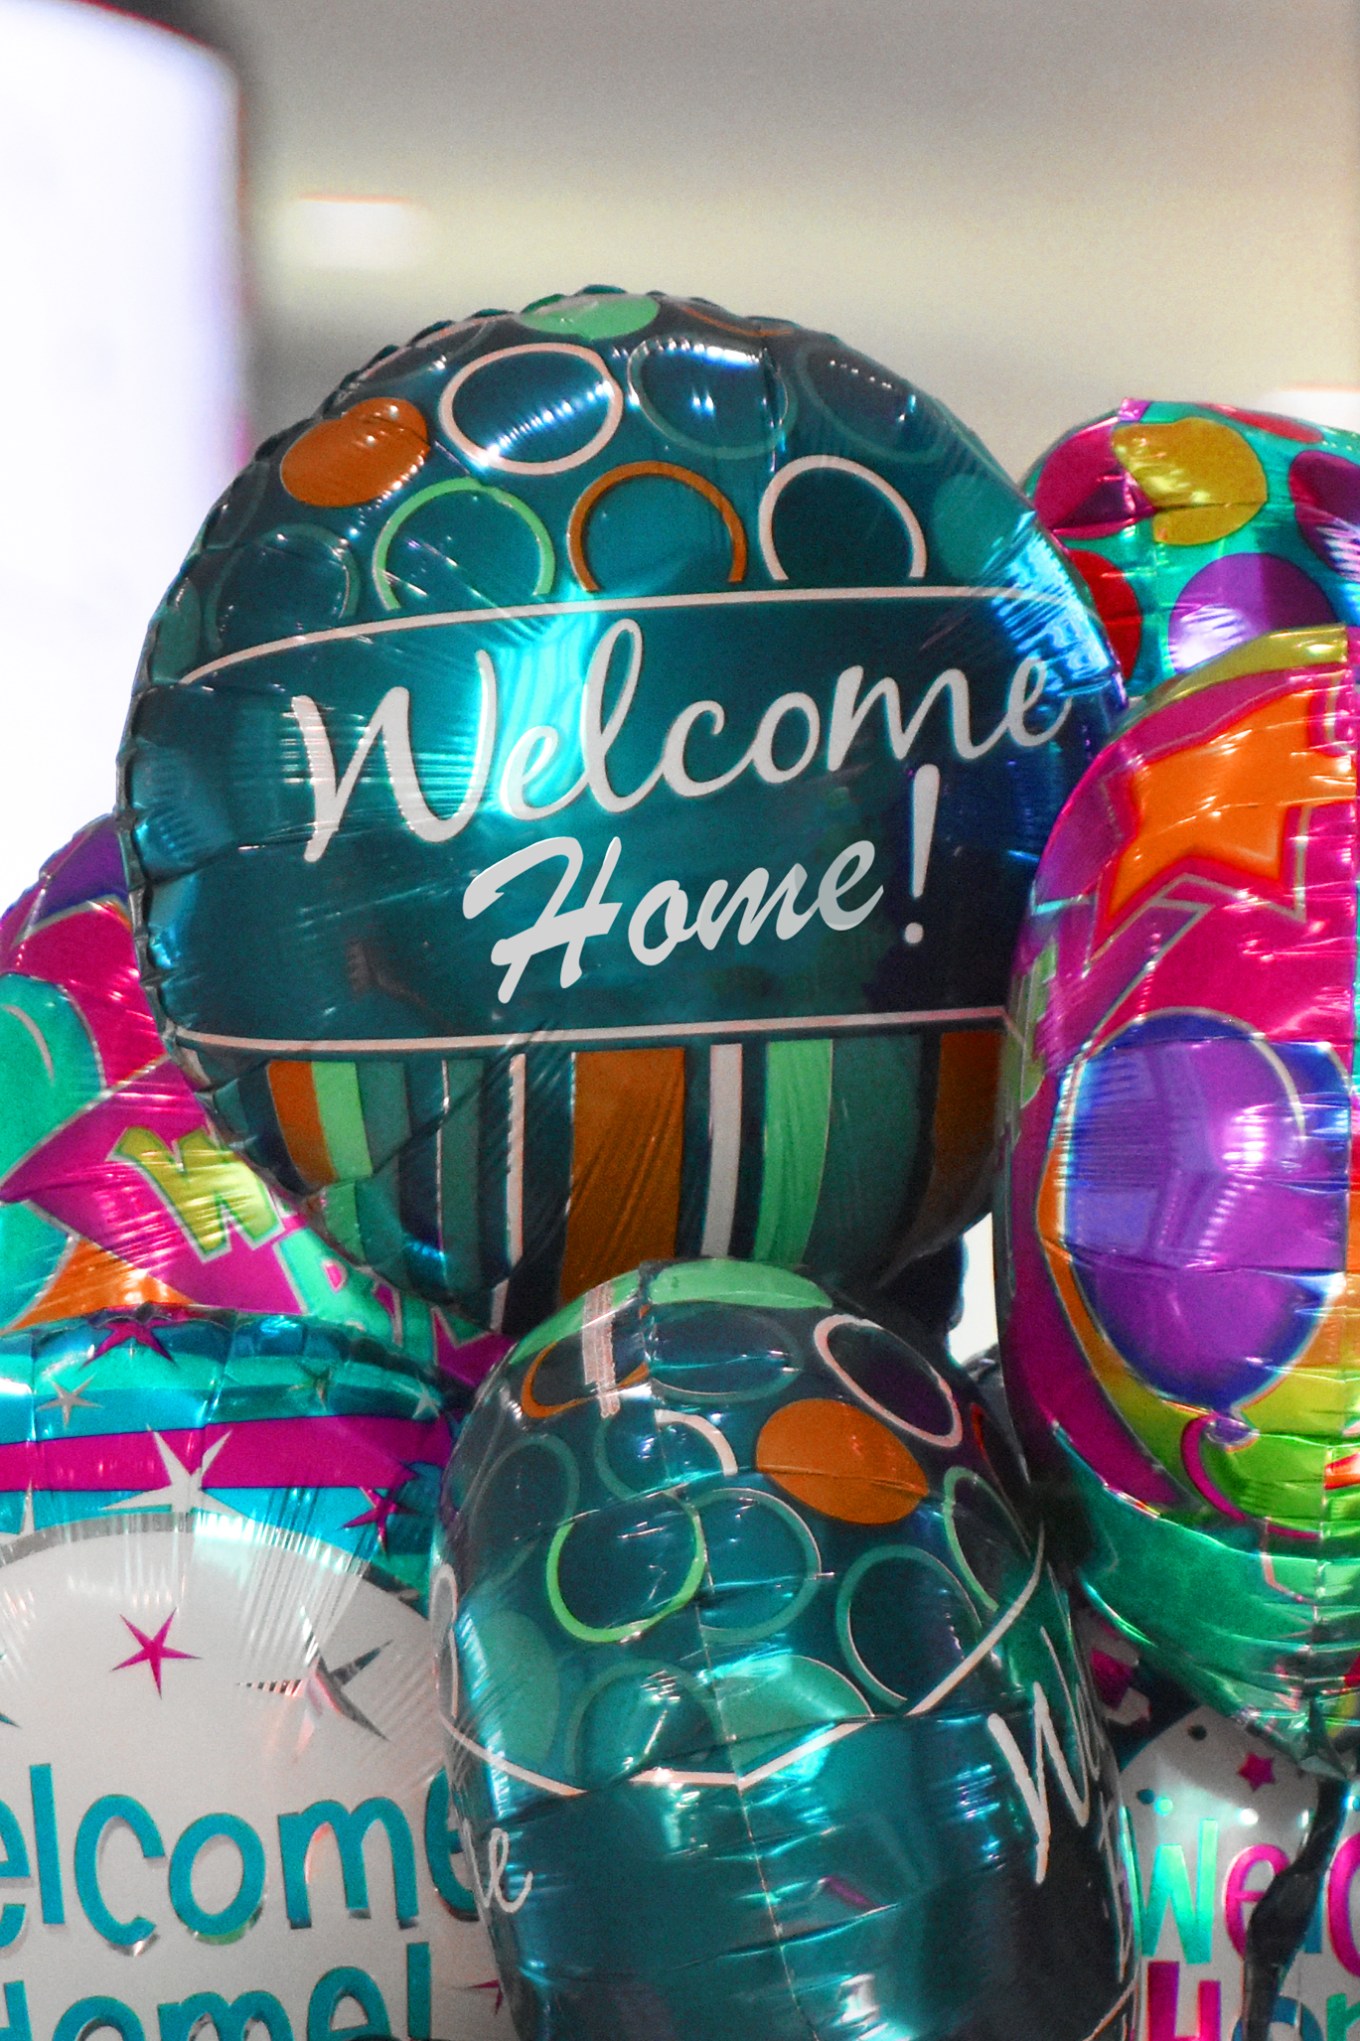 Assortment of foil balloons that say, "Welcome home!"